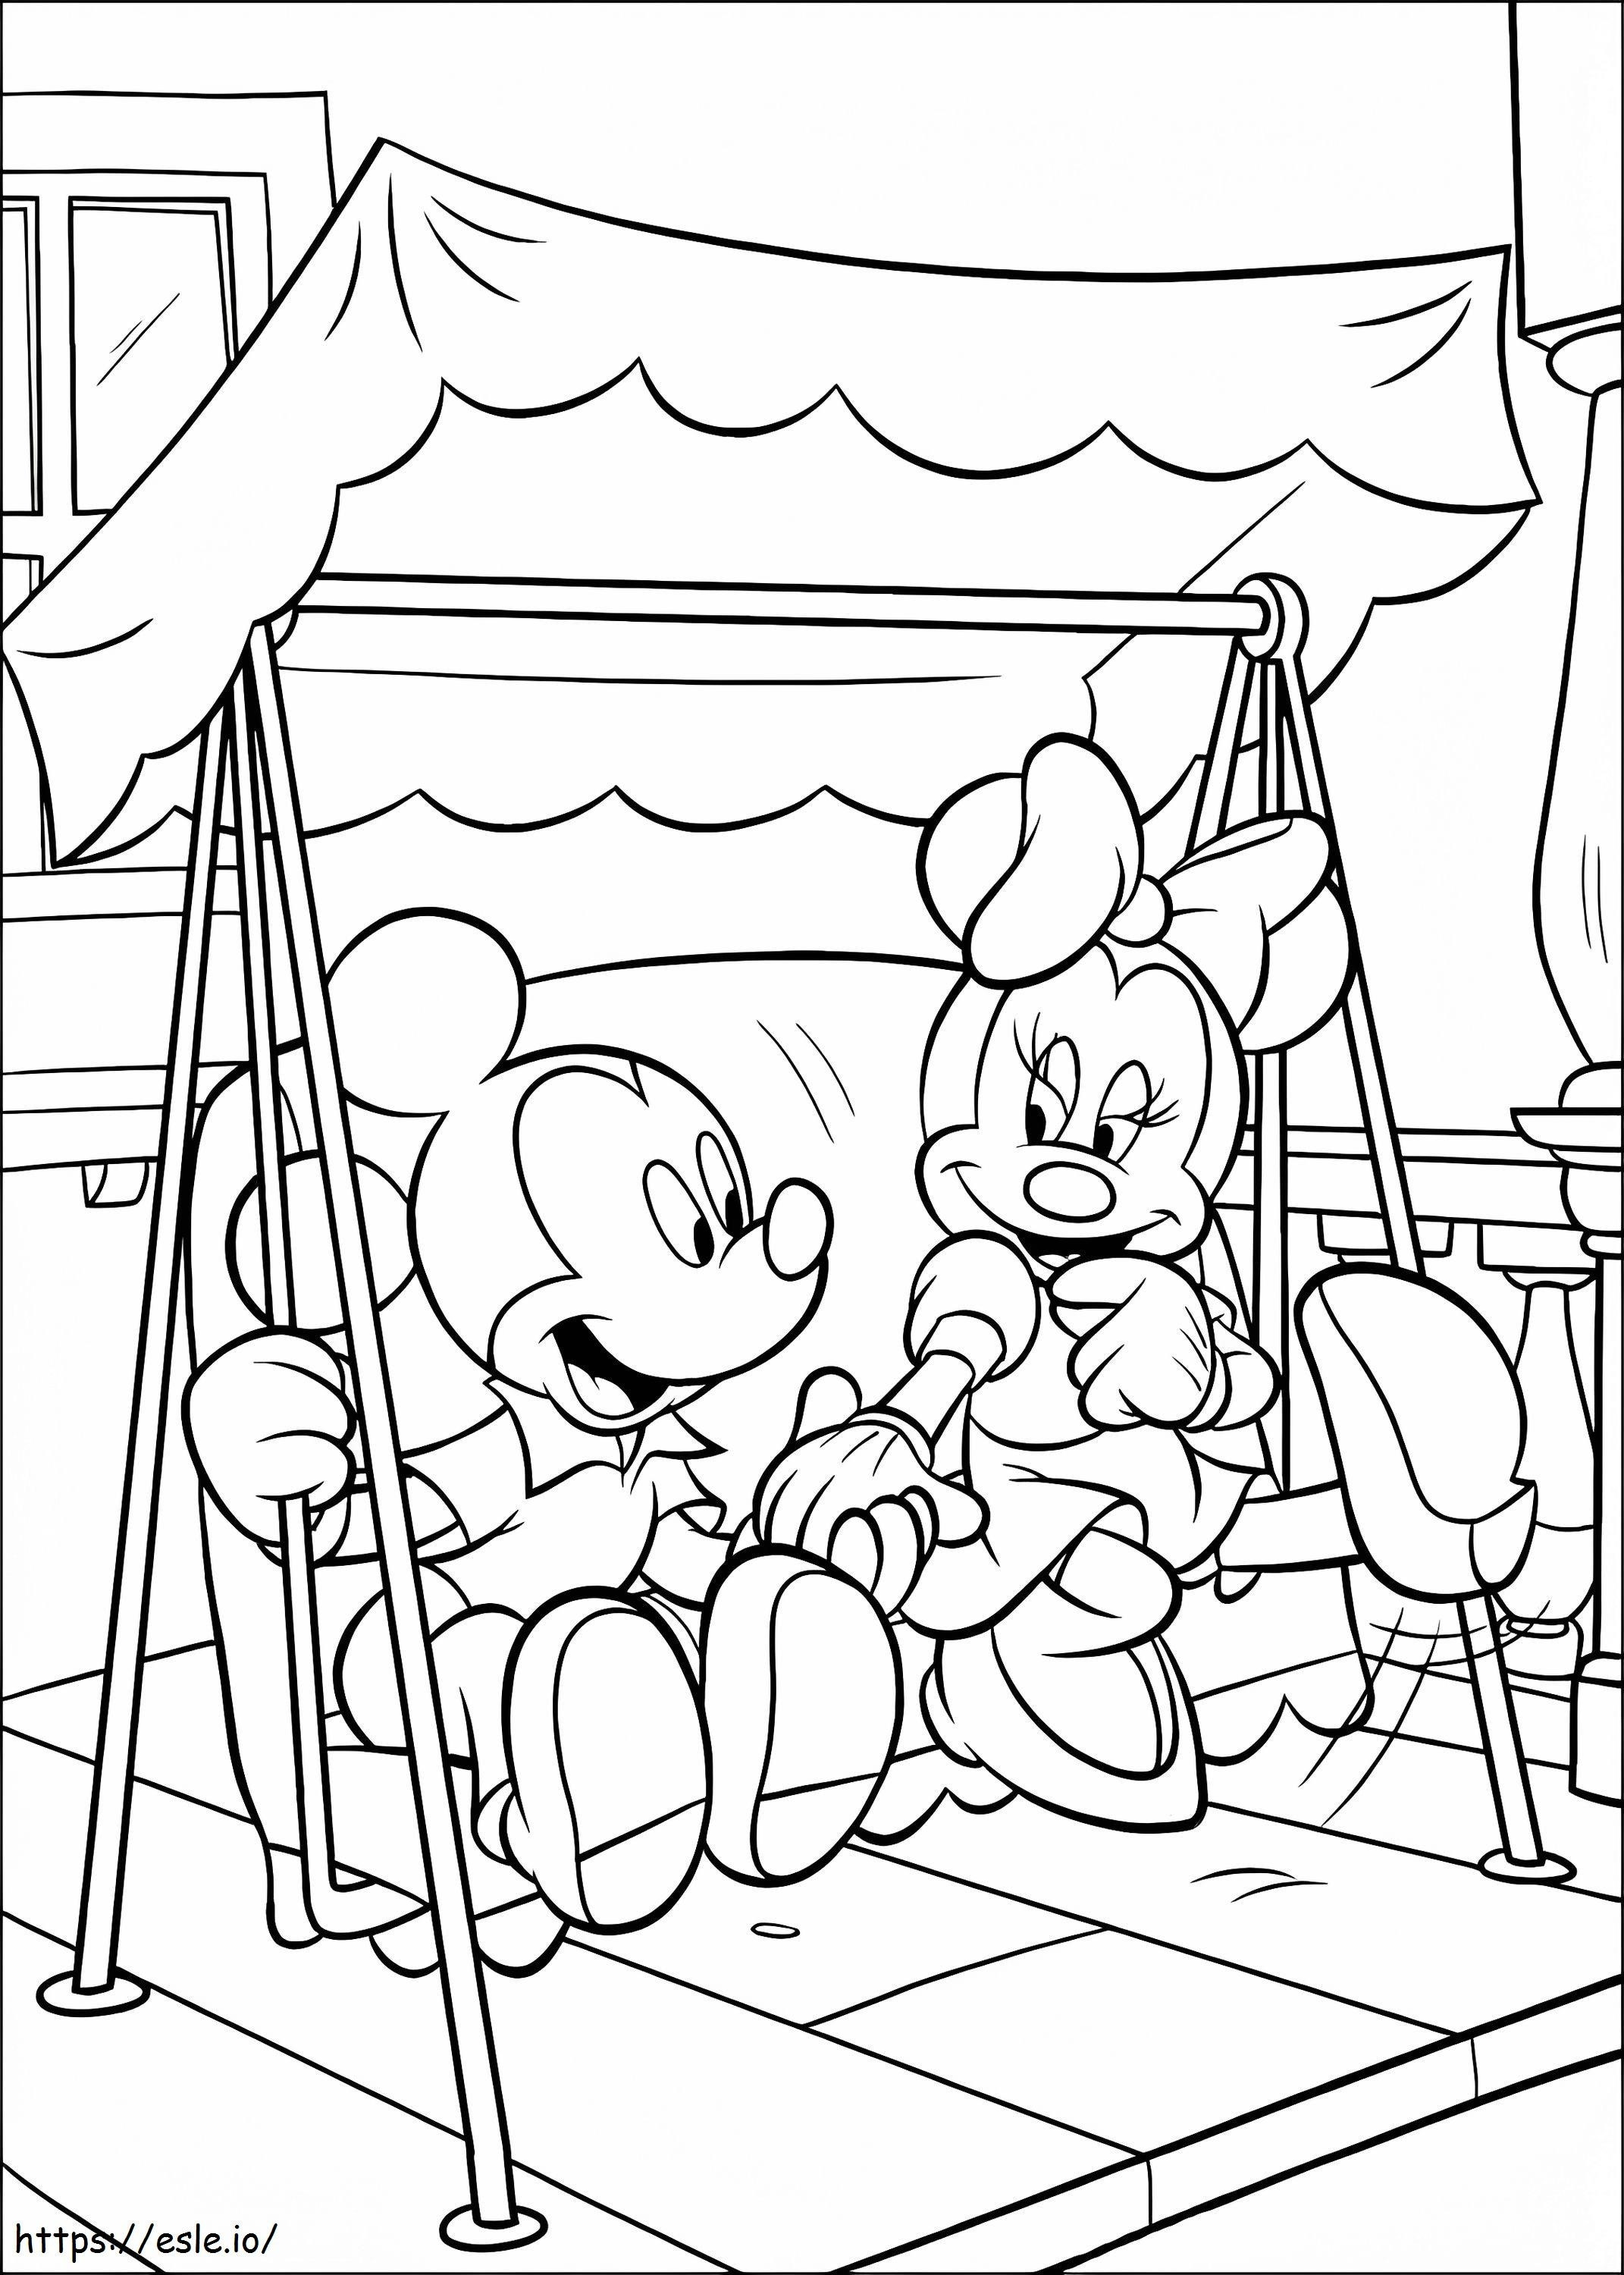 Mickey And Minnie Dating coloring page